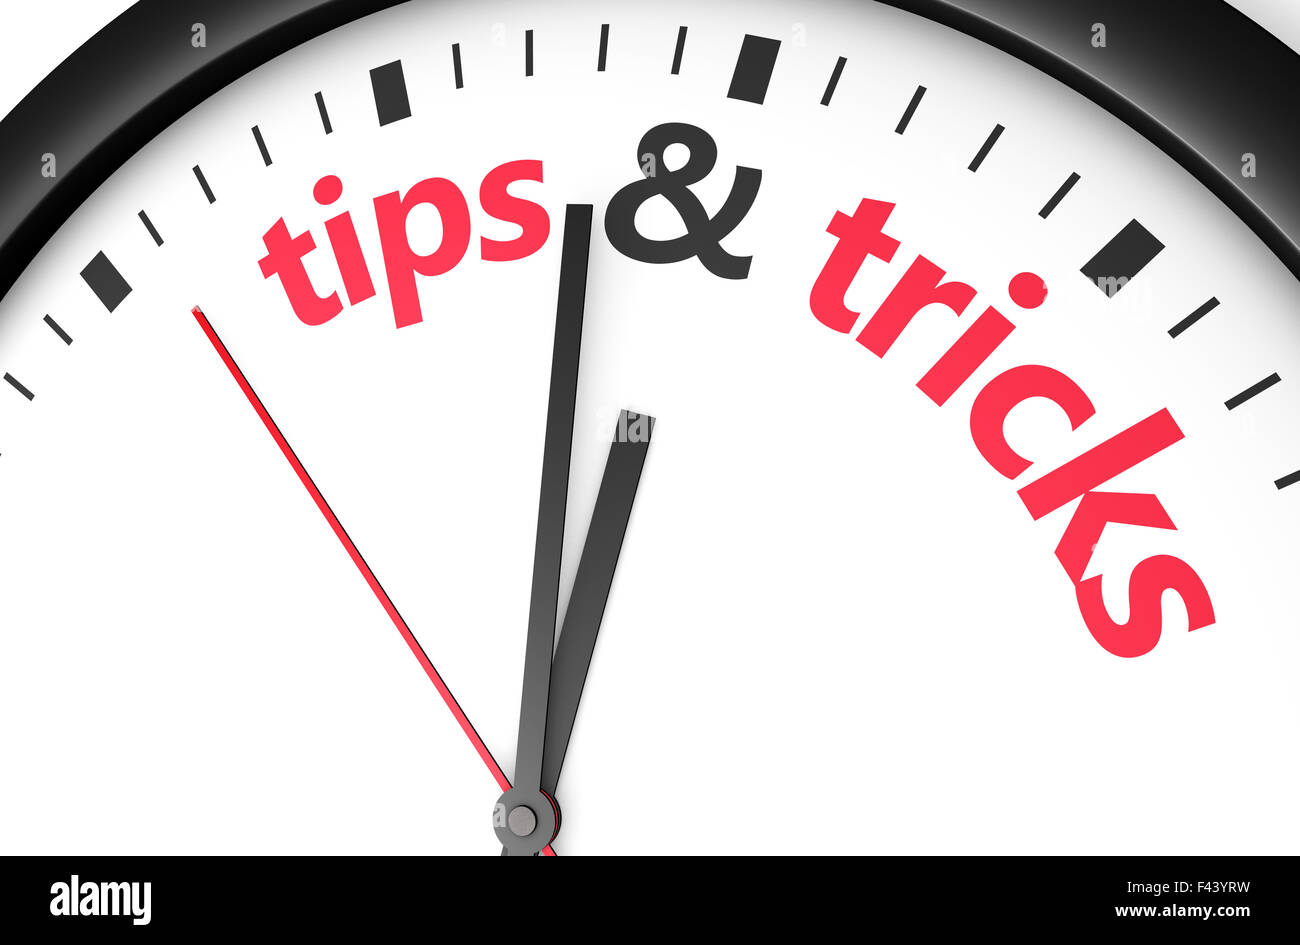 Time for tips and tricks concept with red word and sign printed on a clock face. Stock Photo